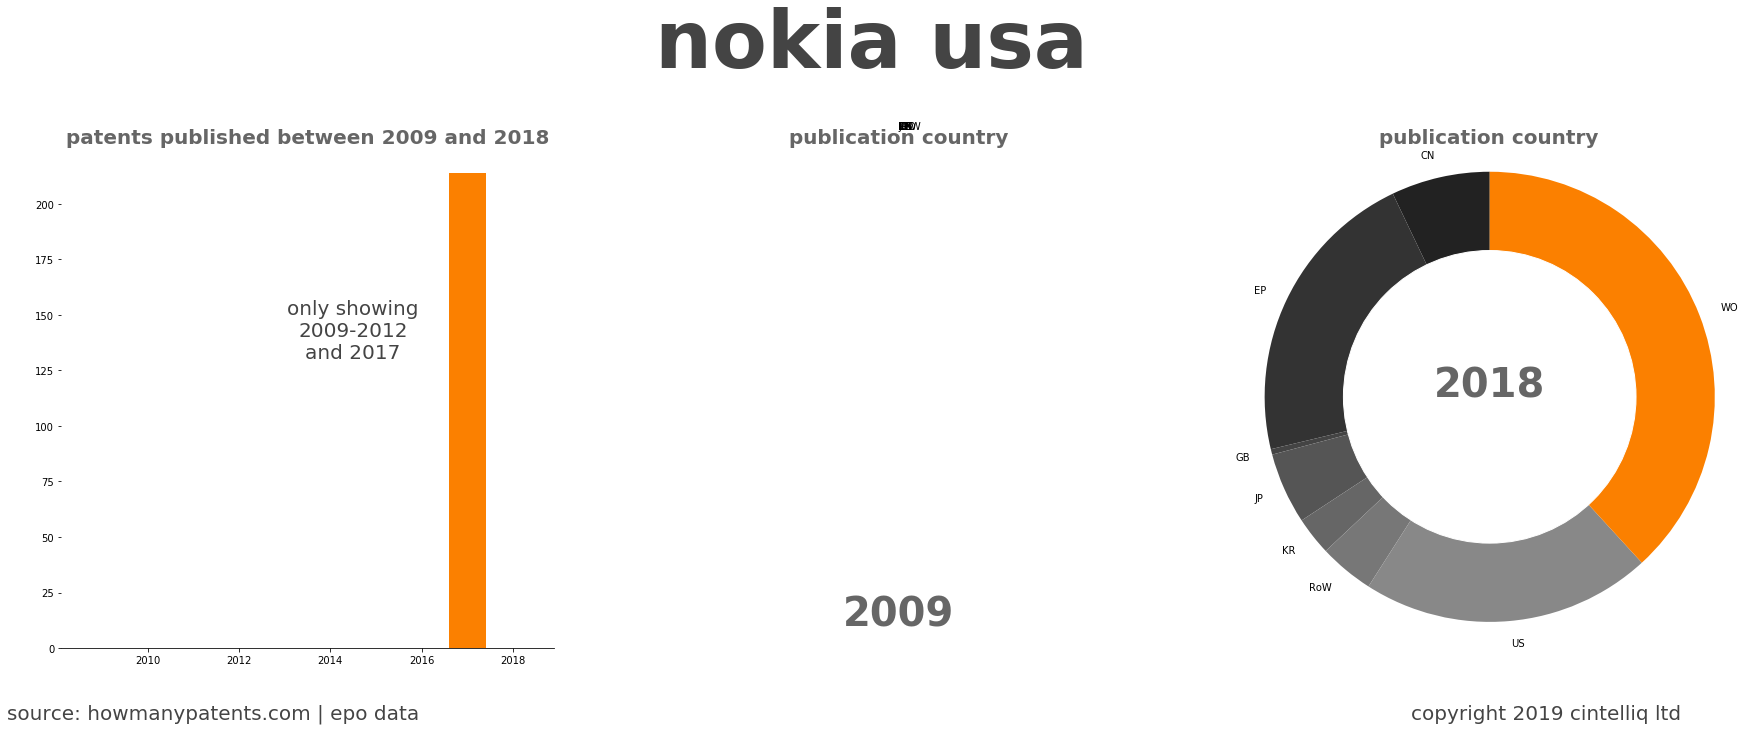 summary of patents for Nokia Usa